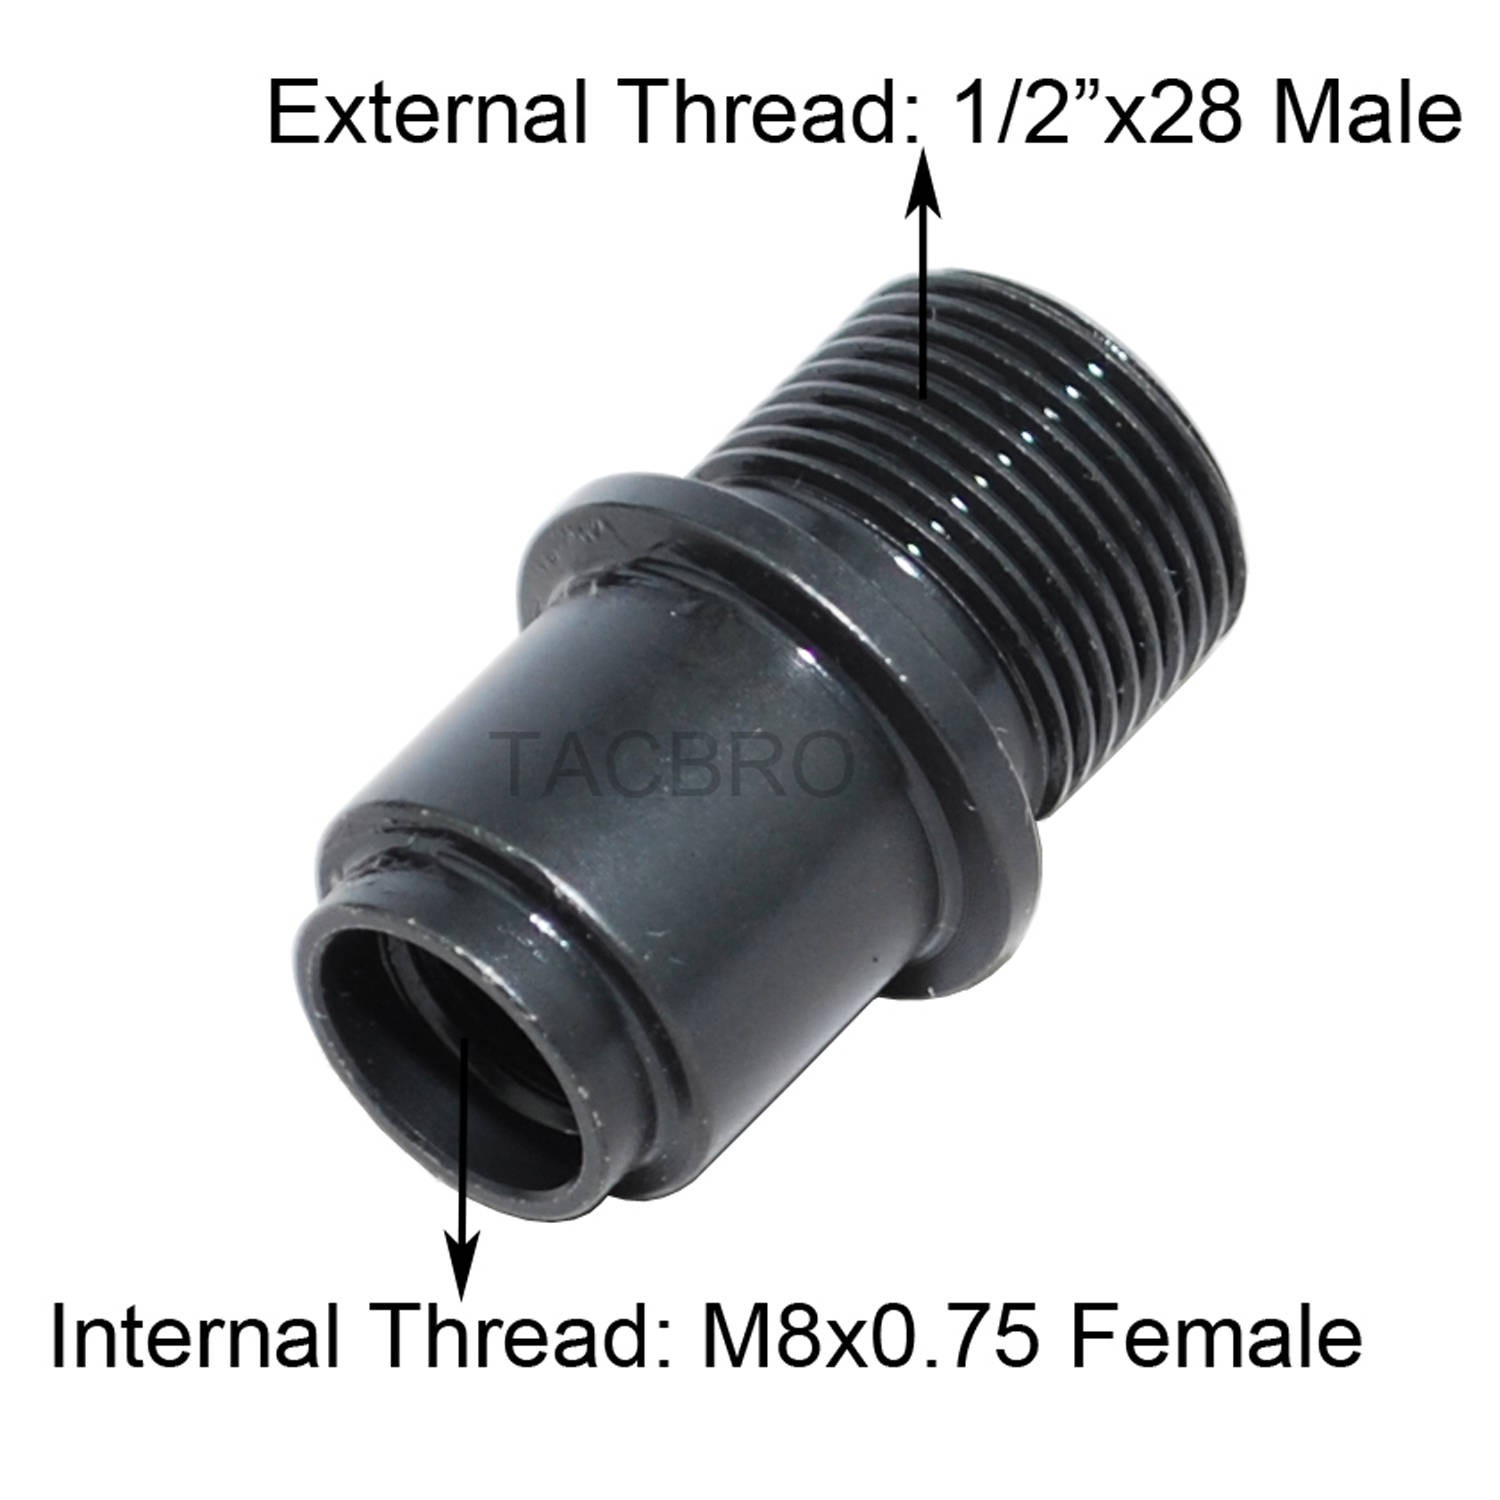 M8x.75 to 1/2x28 Muzzle Thread Adapter, Covert M8x0.75 to 1/2x28